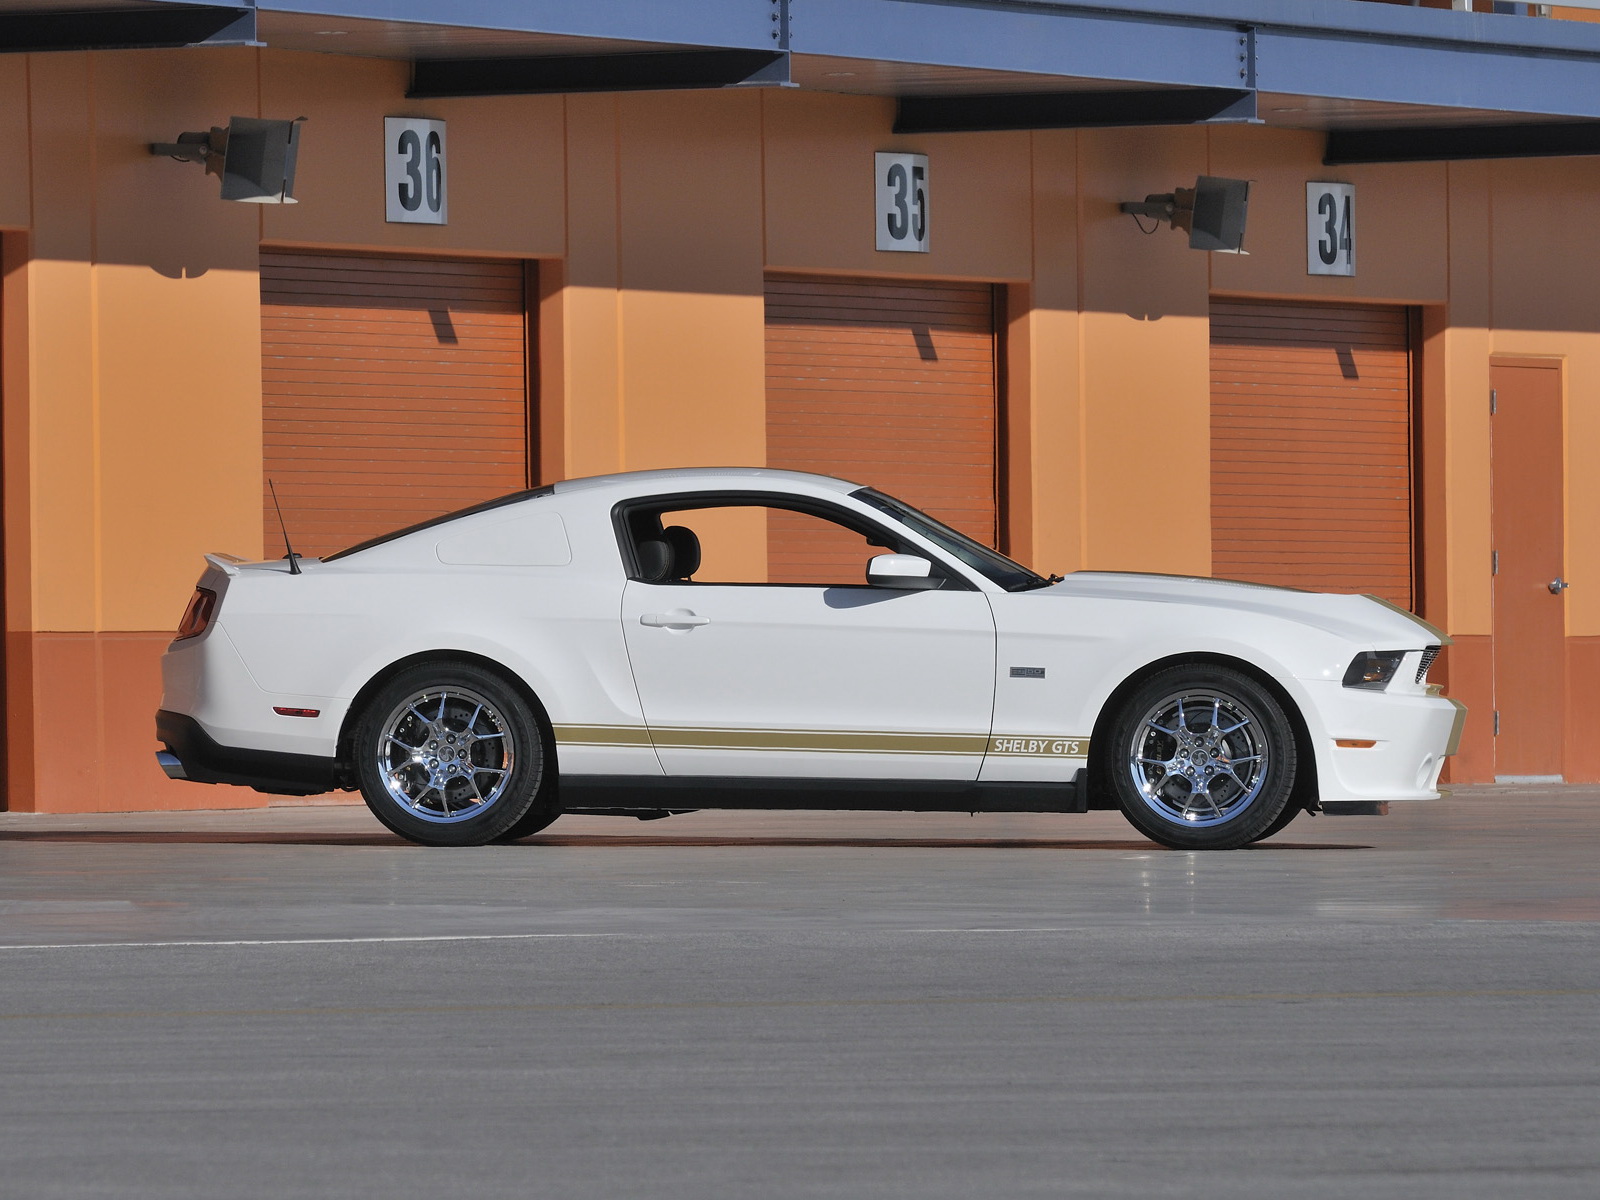 2012, Shelby, Gts, Ford, Mustang, Muscle Wallpaper